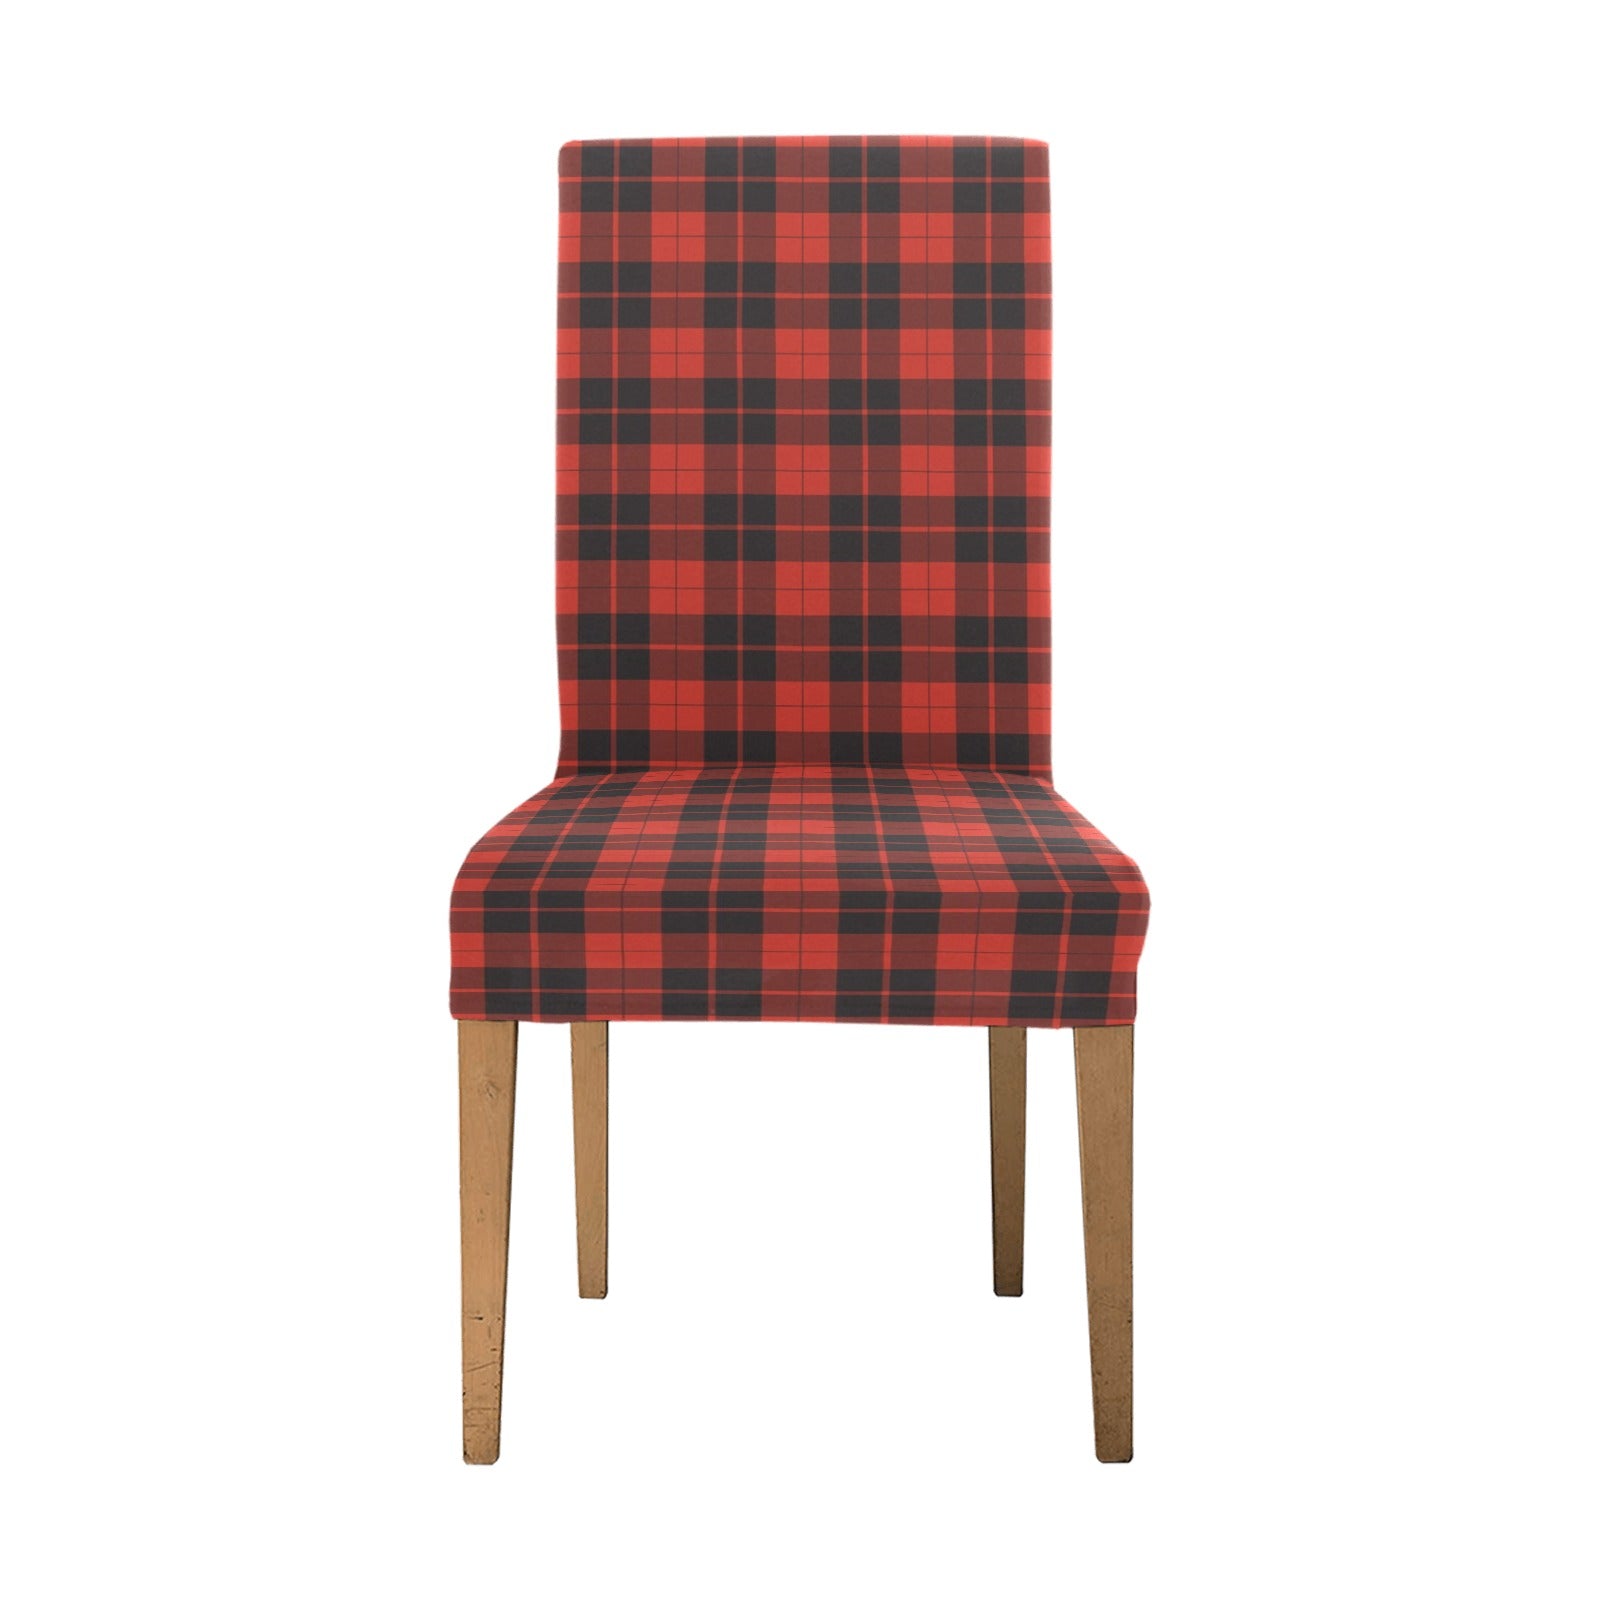 Buffalo Check Dining Chair Seat Covers, Black Red Plaid Stretch Slipcover Furniture Dining Room Home Decor Starcove Fashion